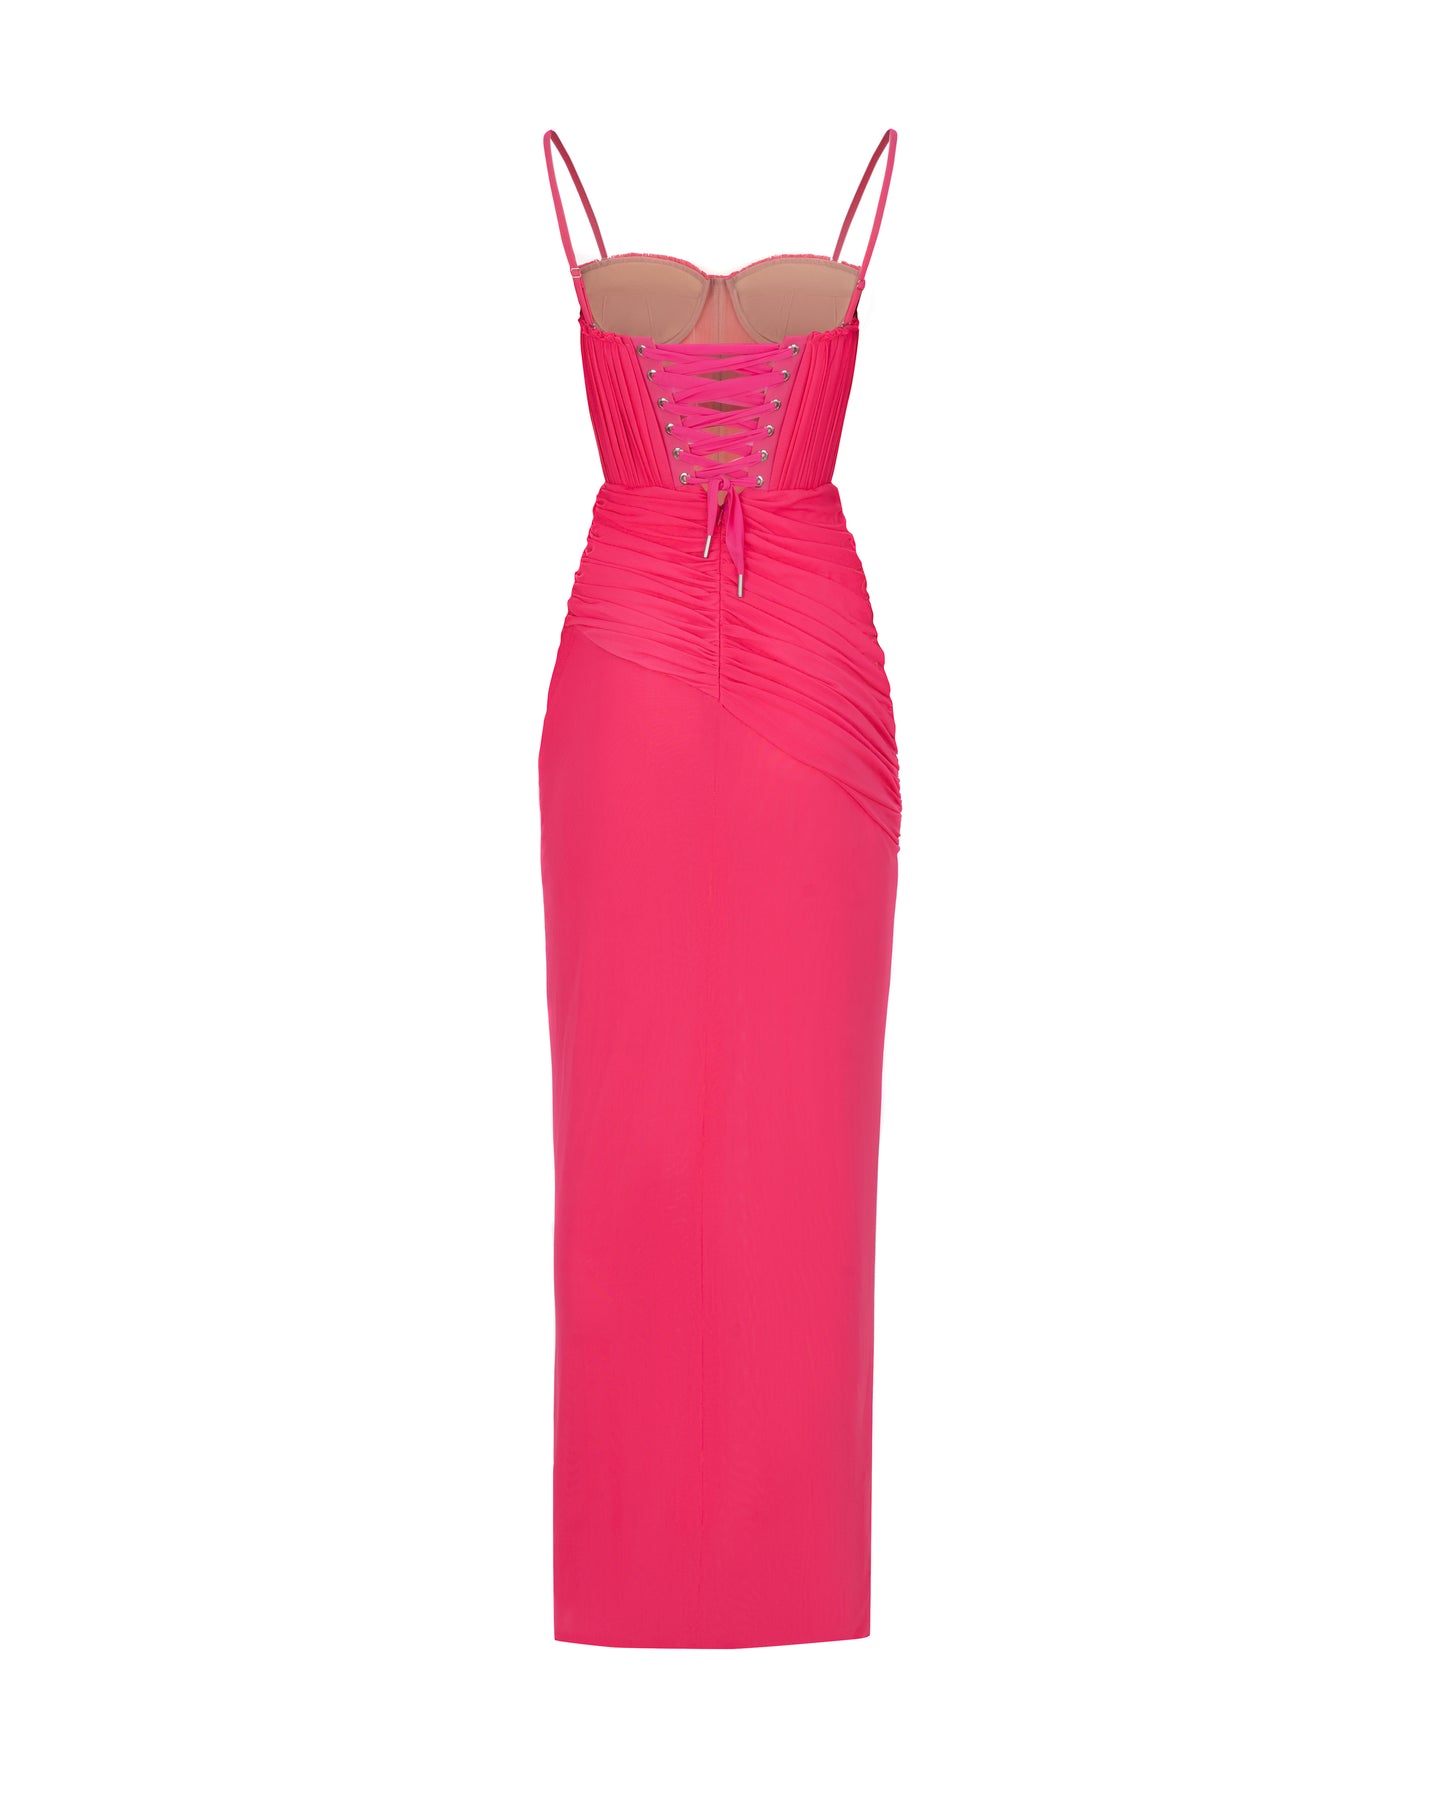 Vibrant pink bustier maxi dress Milla Dresses - USA, Worldwide delivery